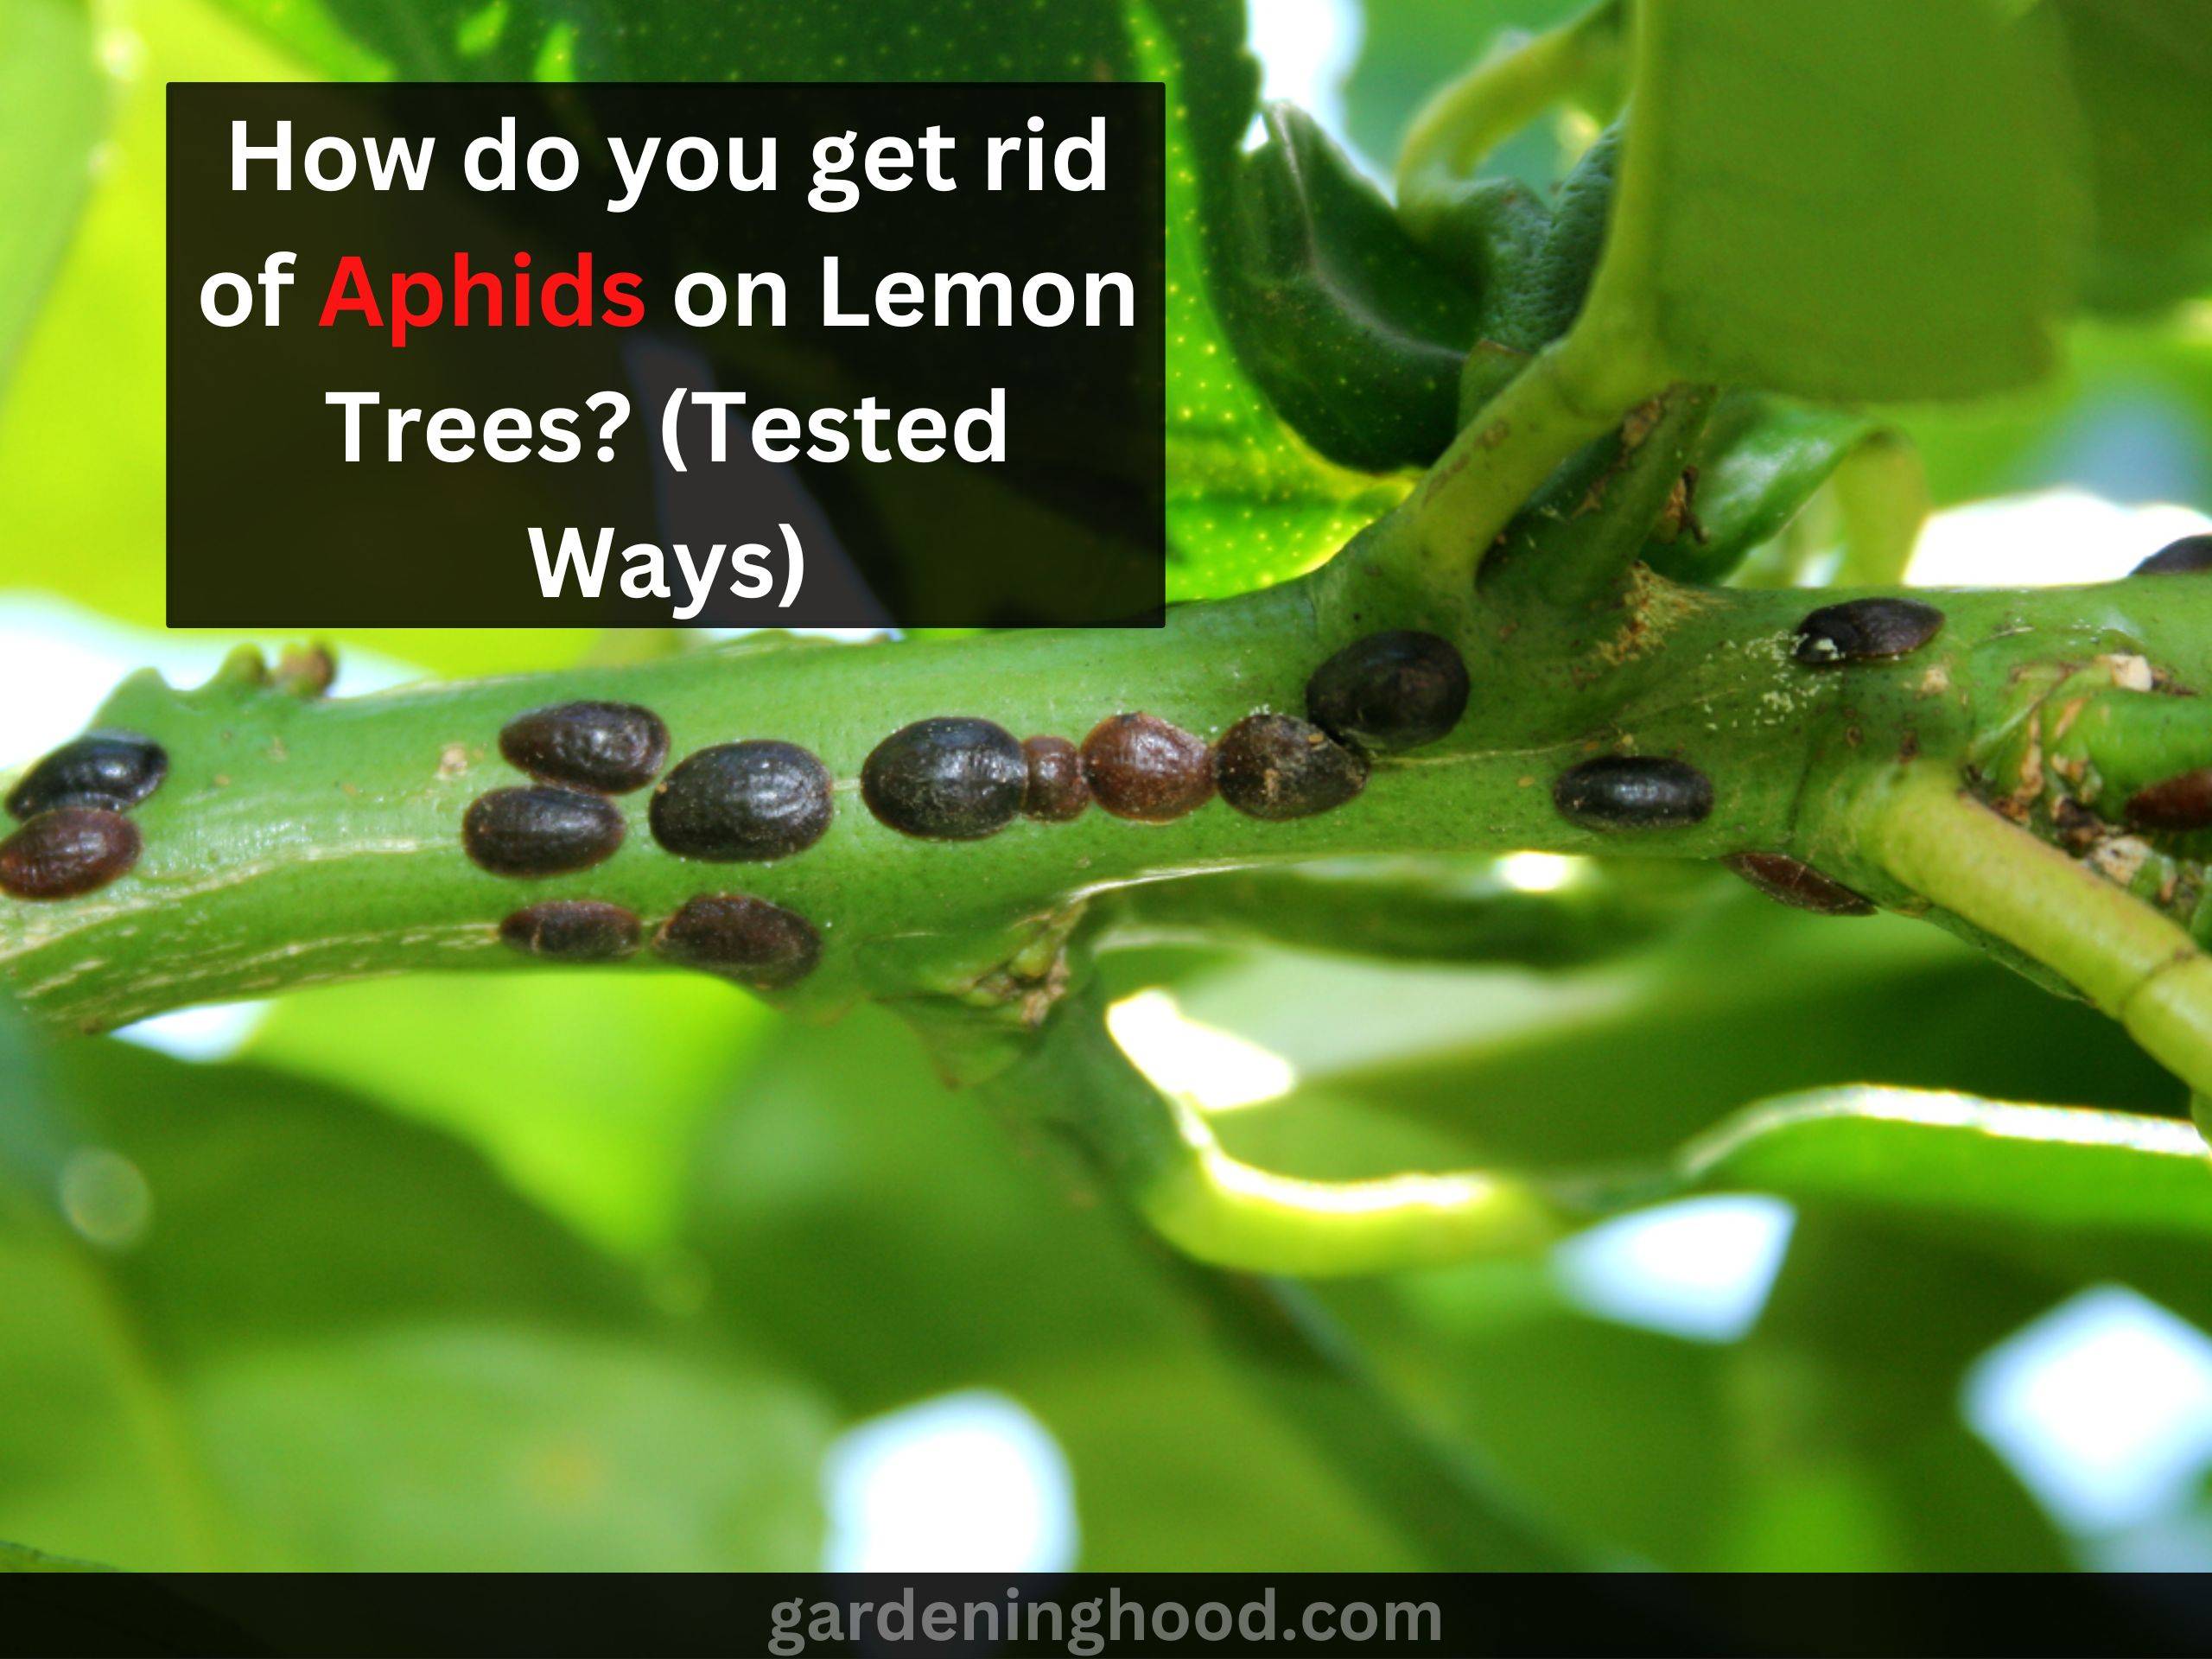 How do you get rid of Aphids on Lemon Trees? (Tested Ways)